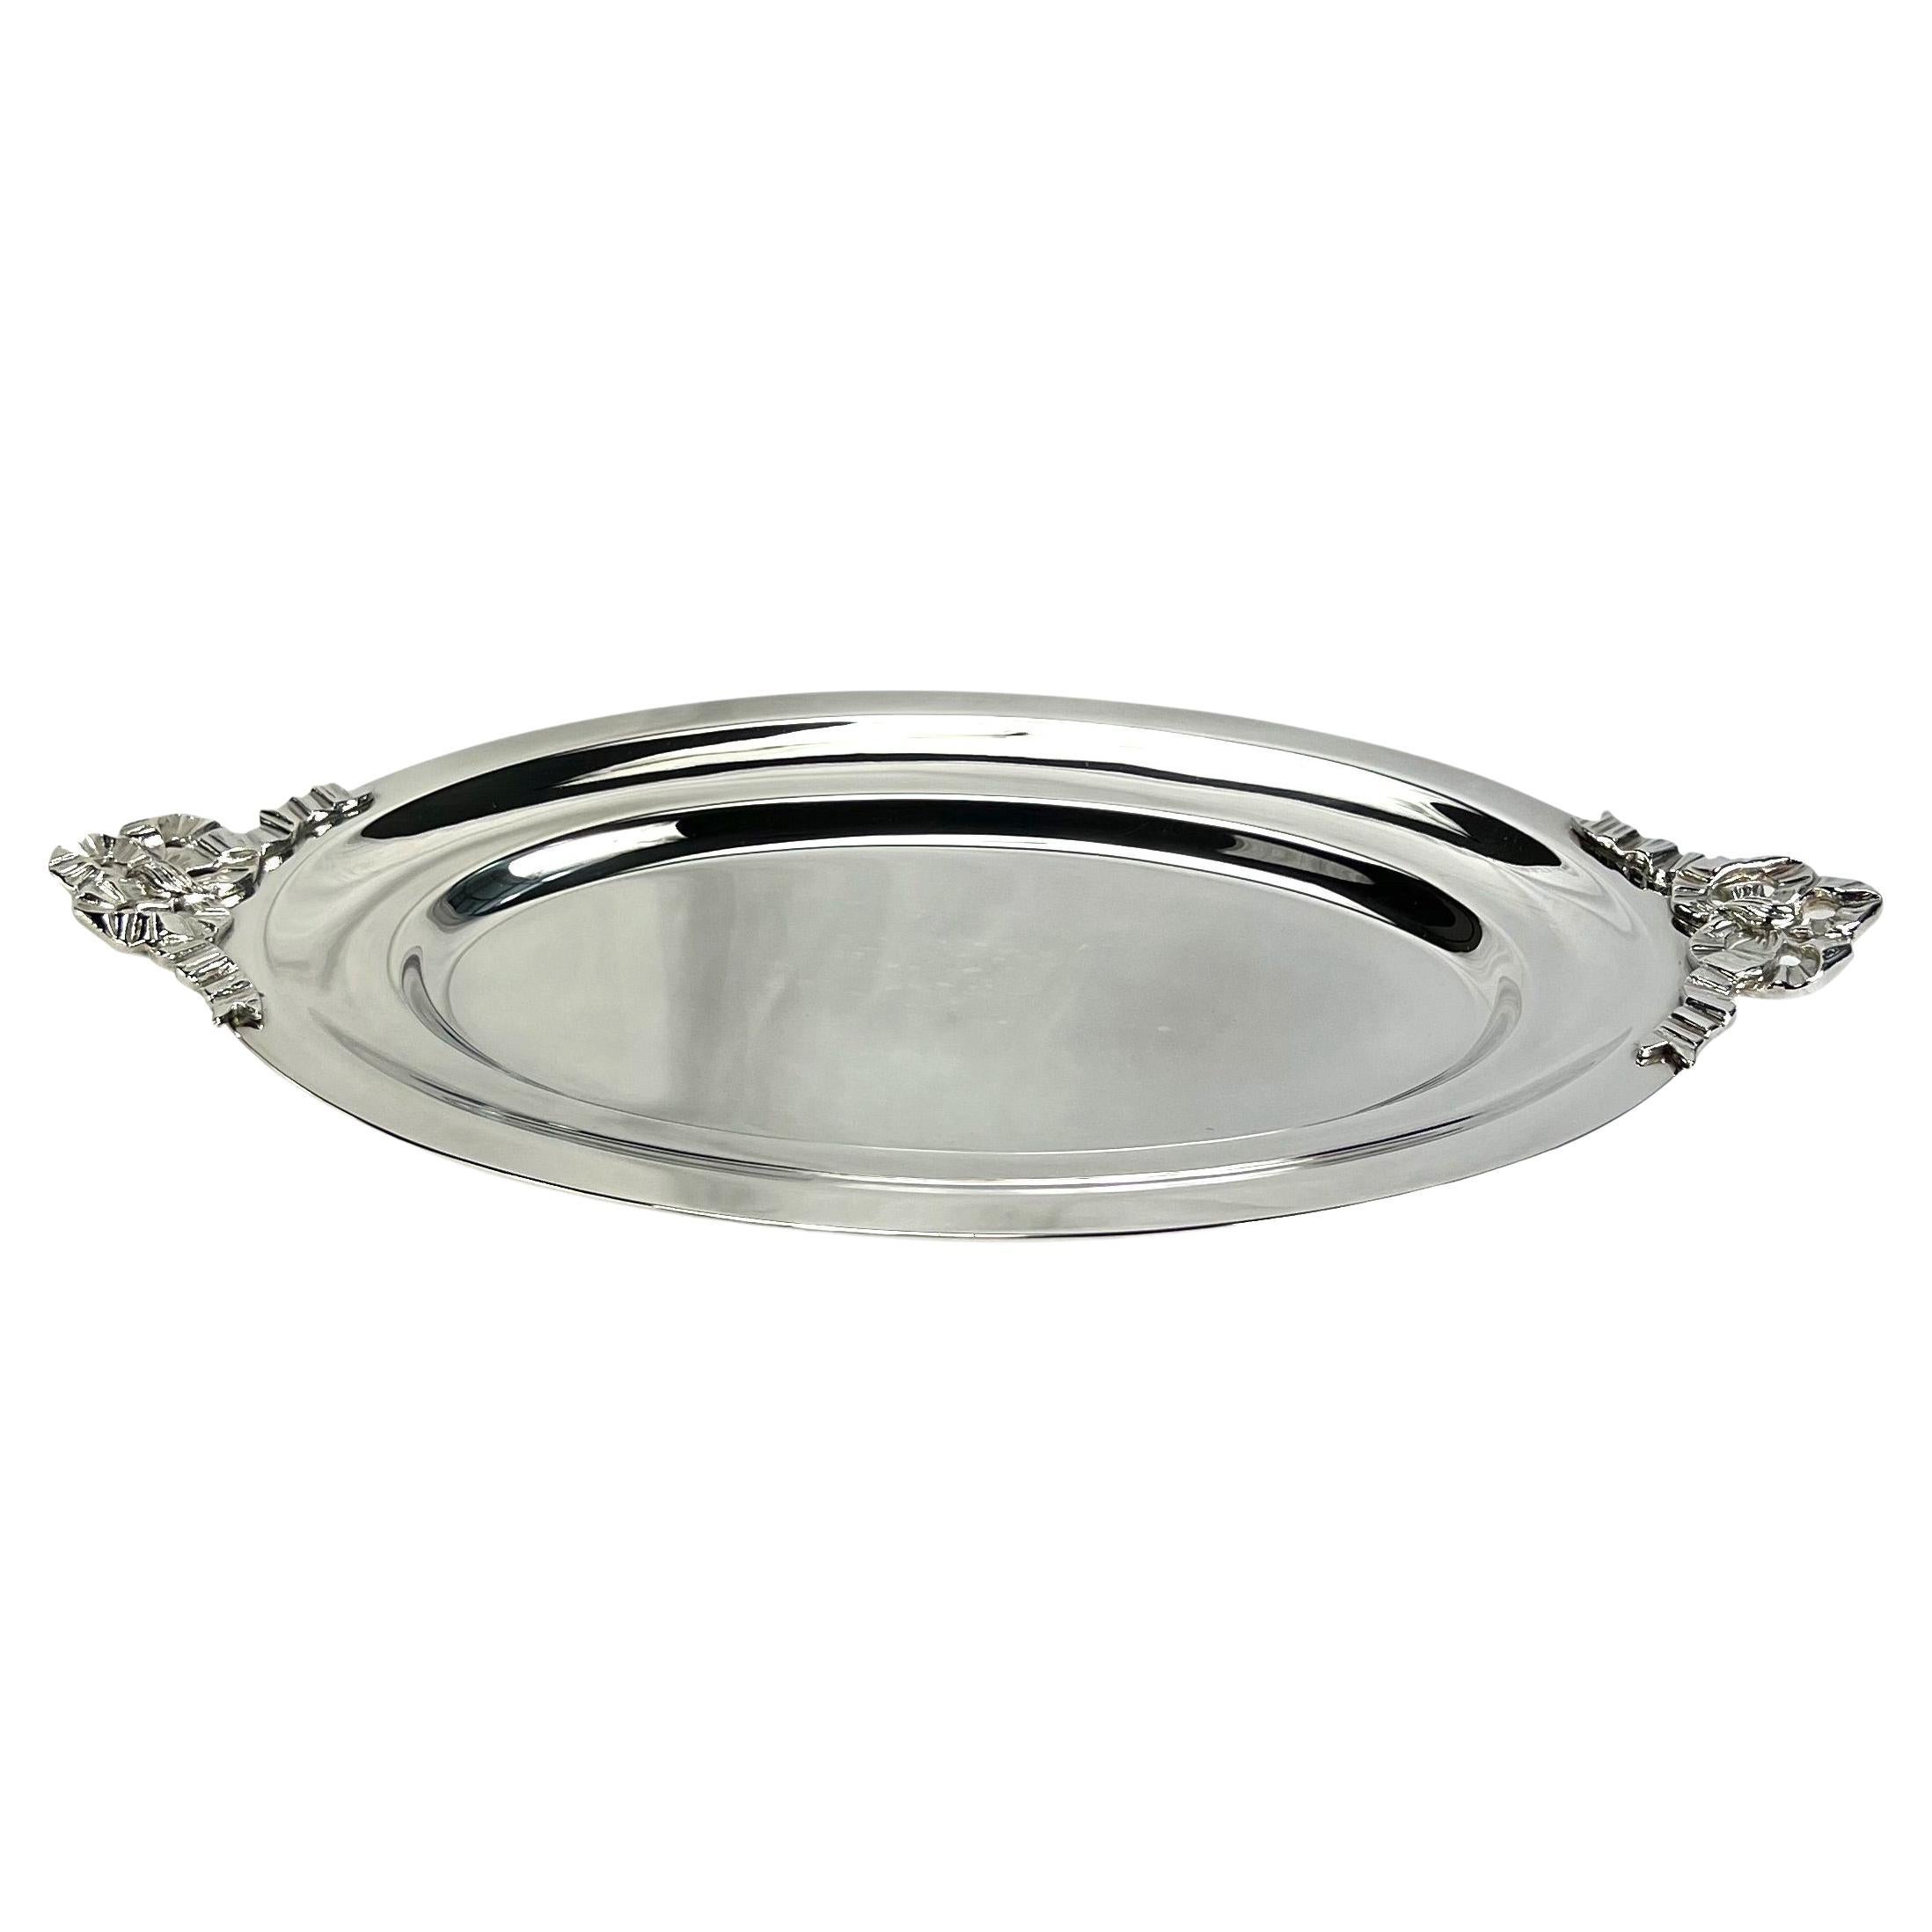 Christian Dior Silver-Plate Ribbon Accented Vintage Decorative Serving Plate For Sale